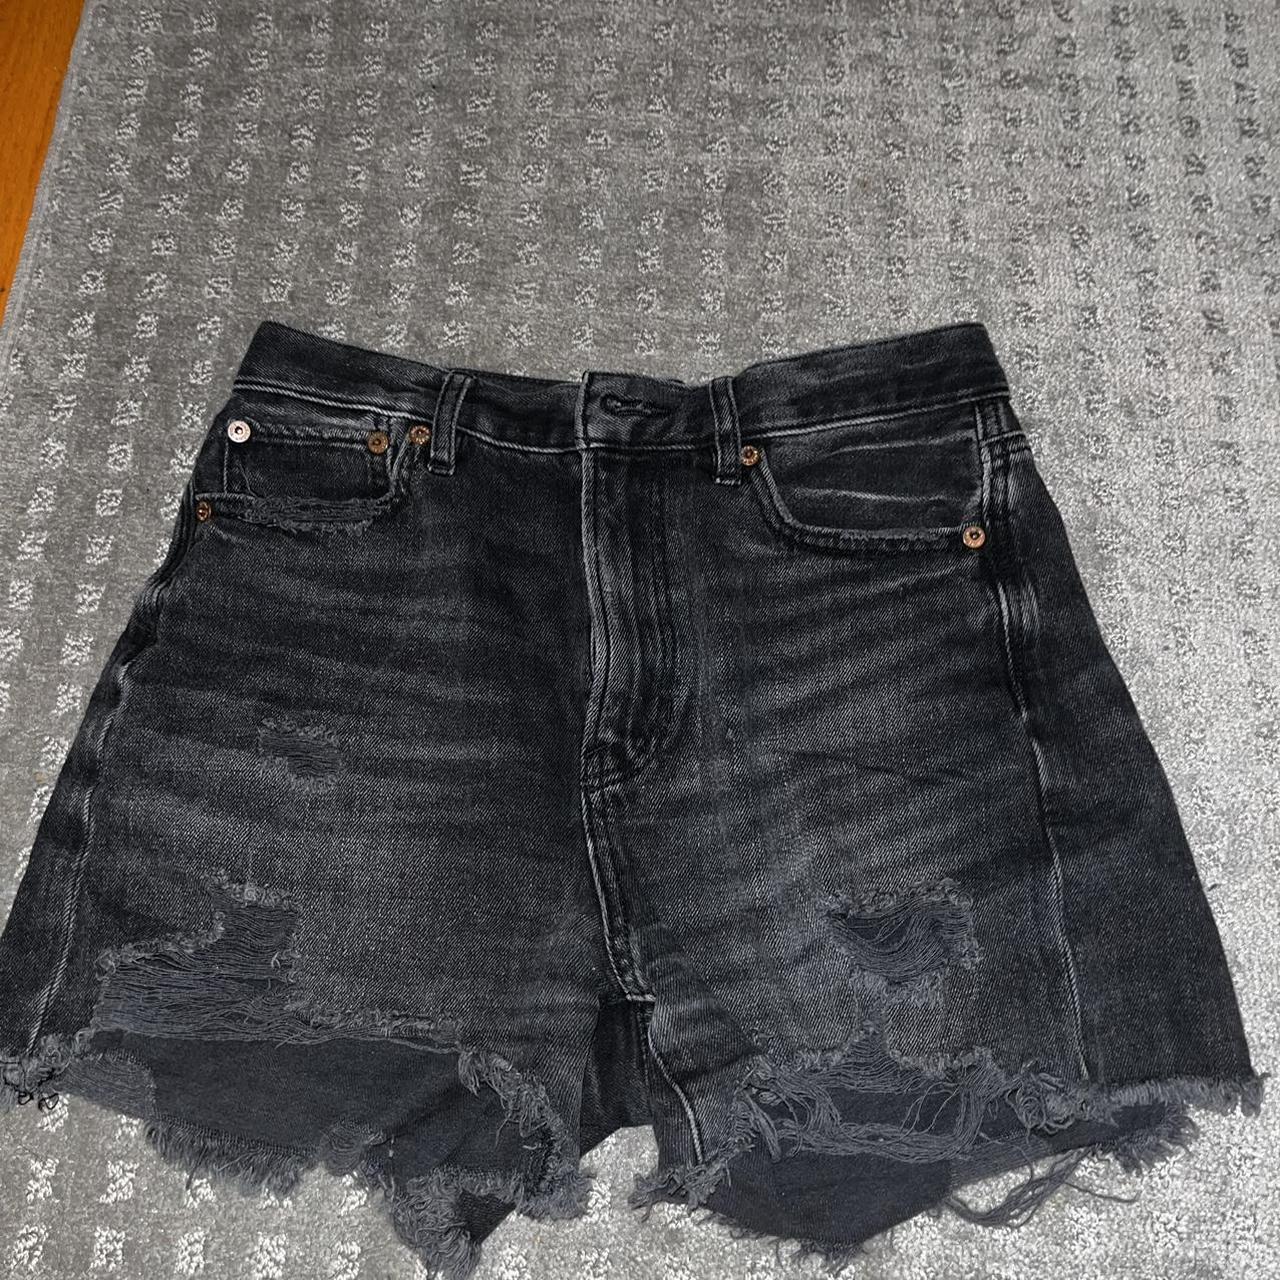 Black American eagle shorts! Have a worn look to... - Depop